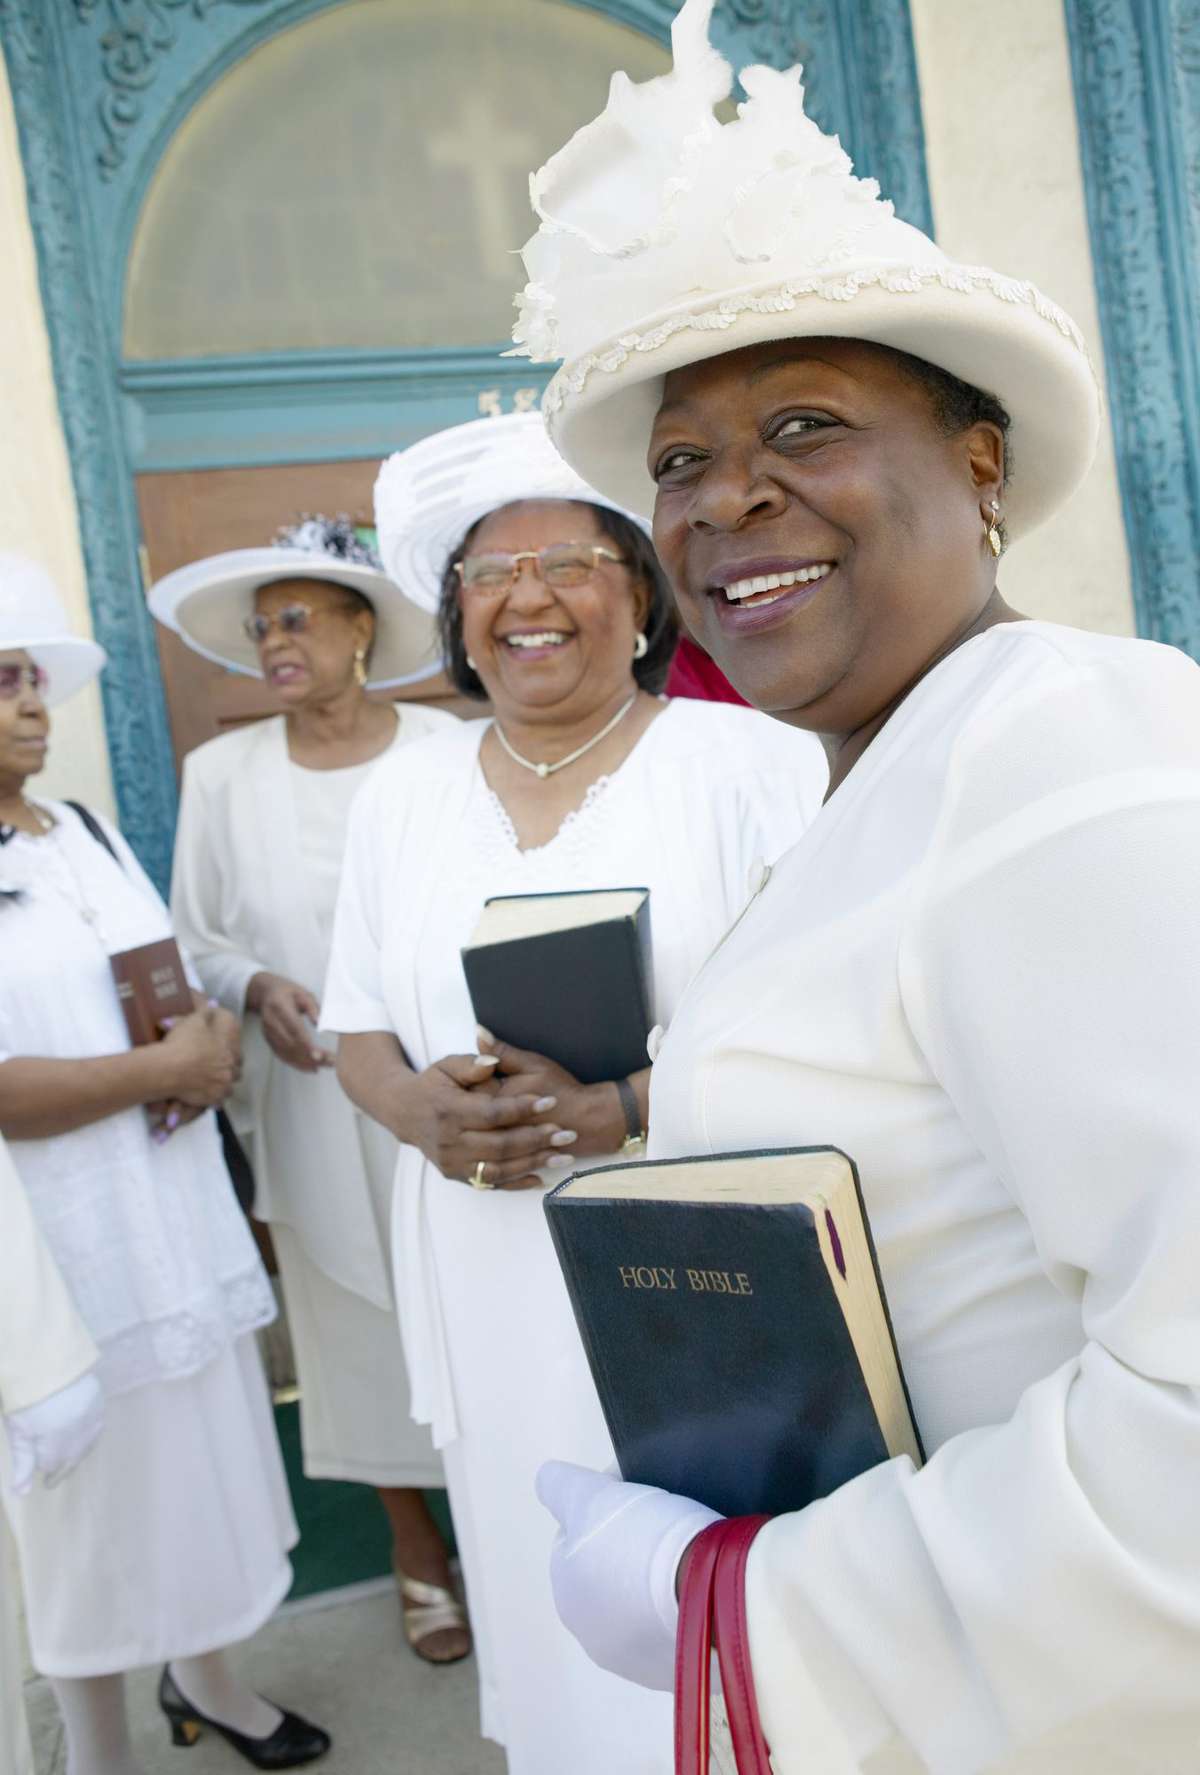 Congregation of Women Dressed in White Clothing Standing Outside a Church